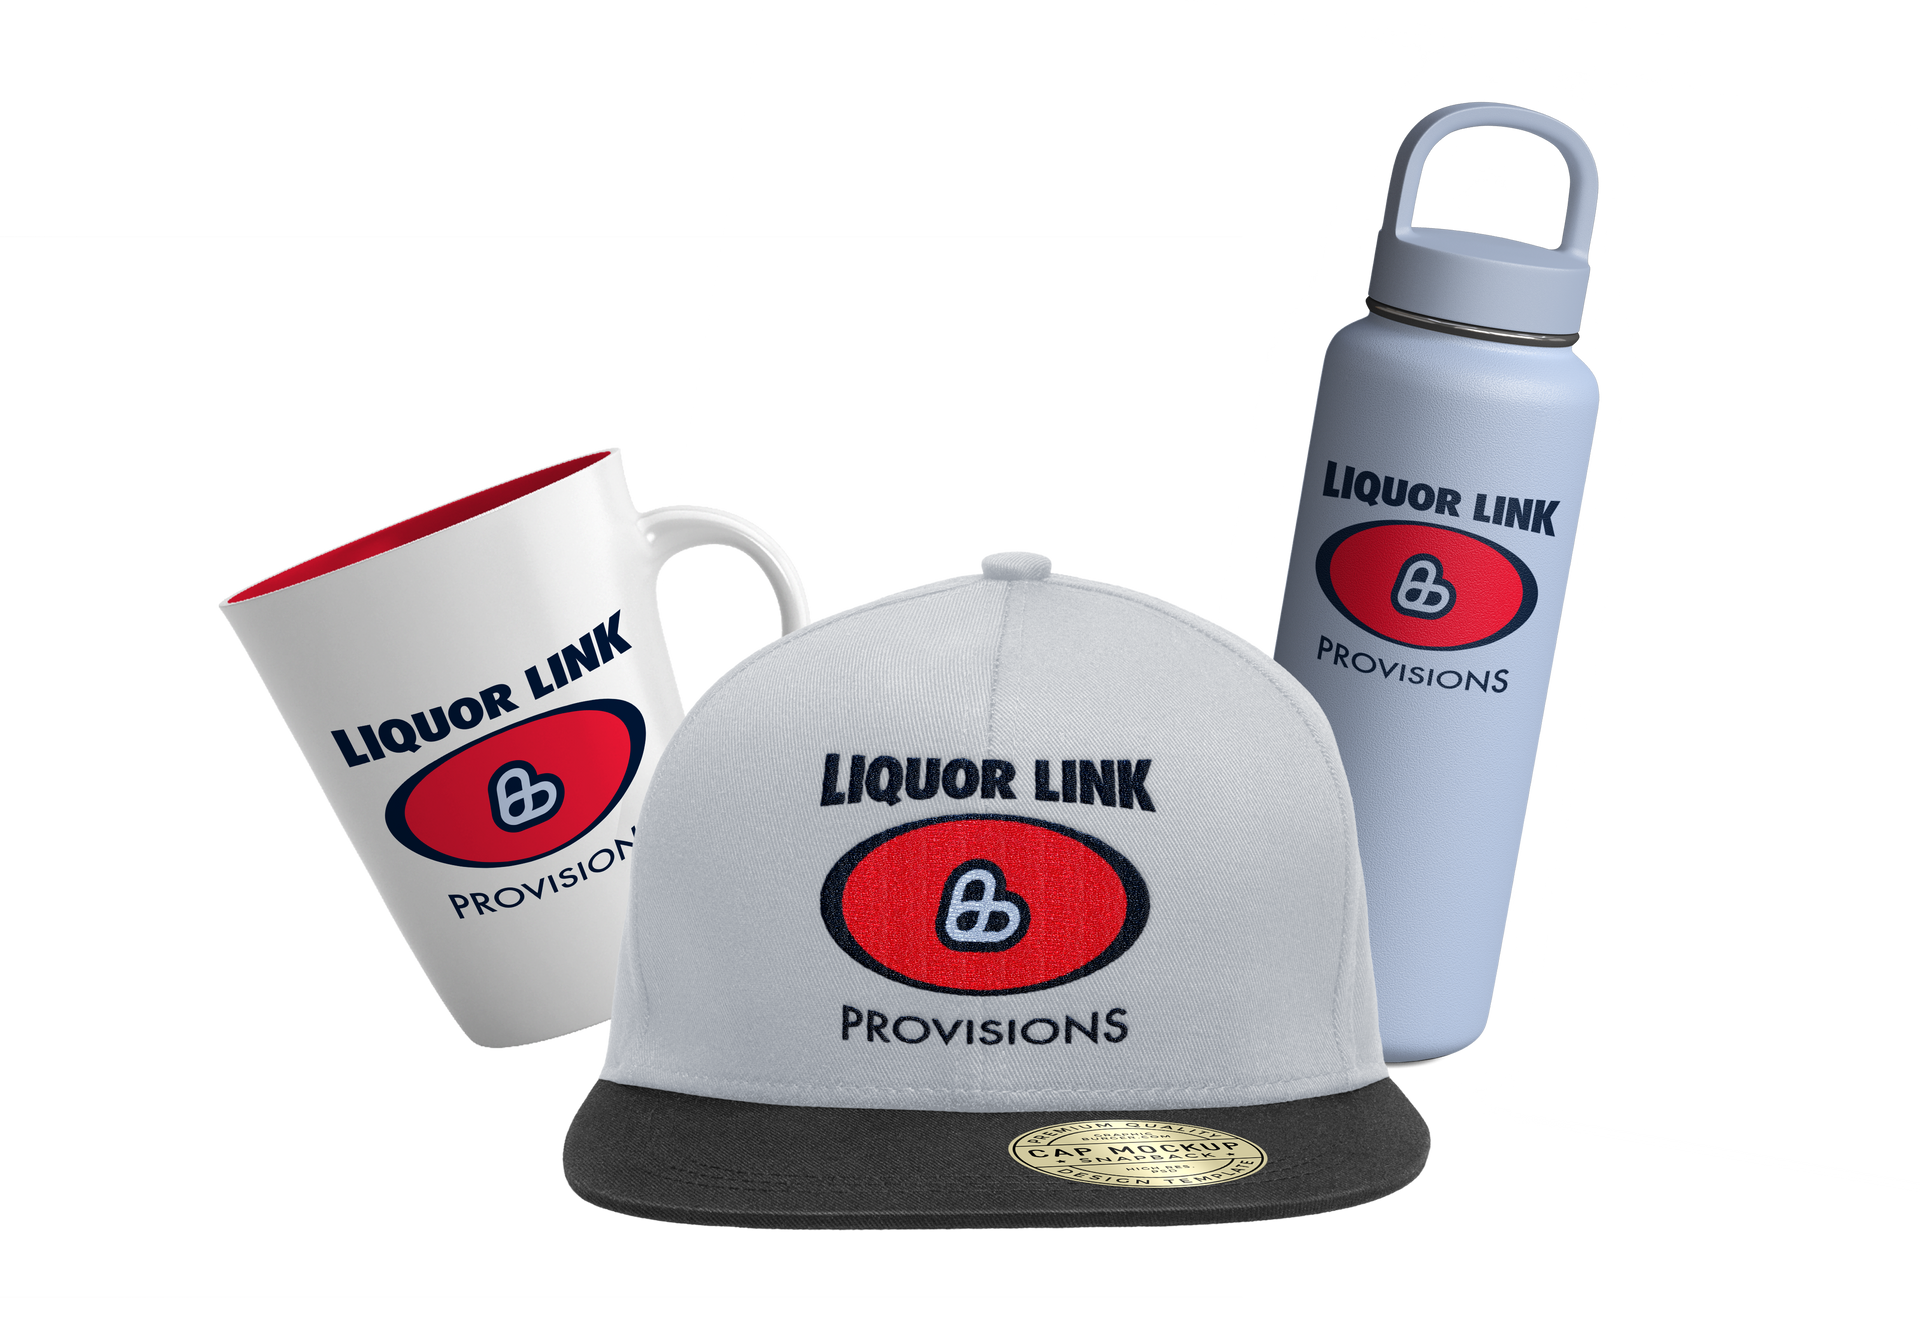 customized promotional items